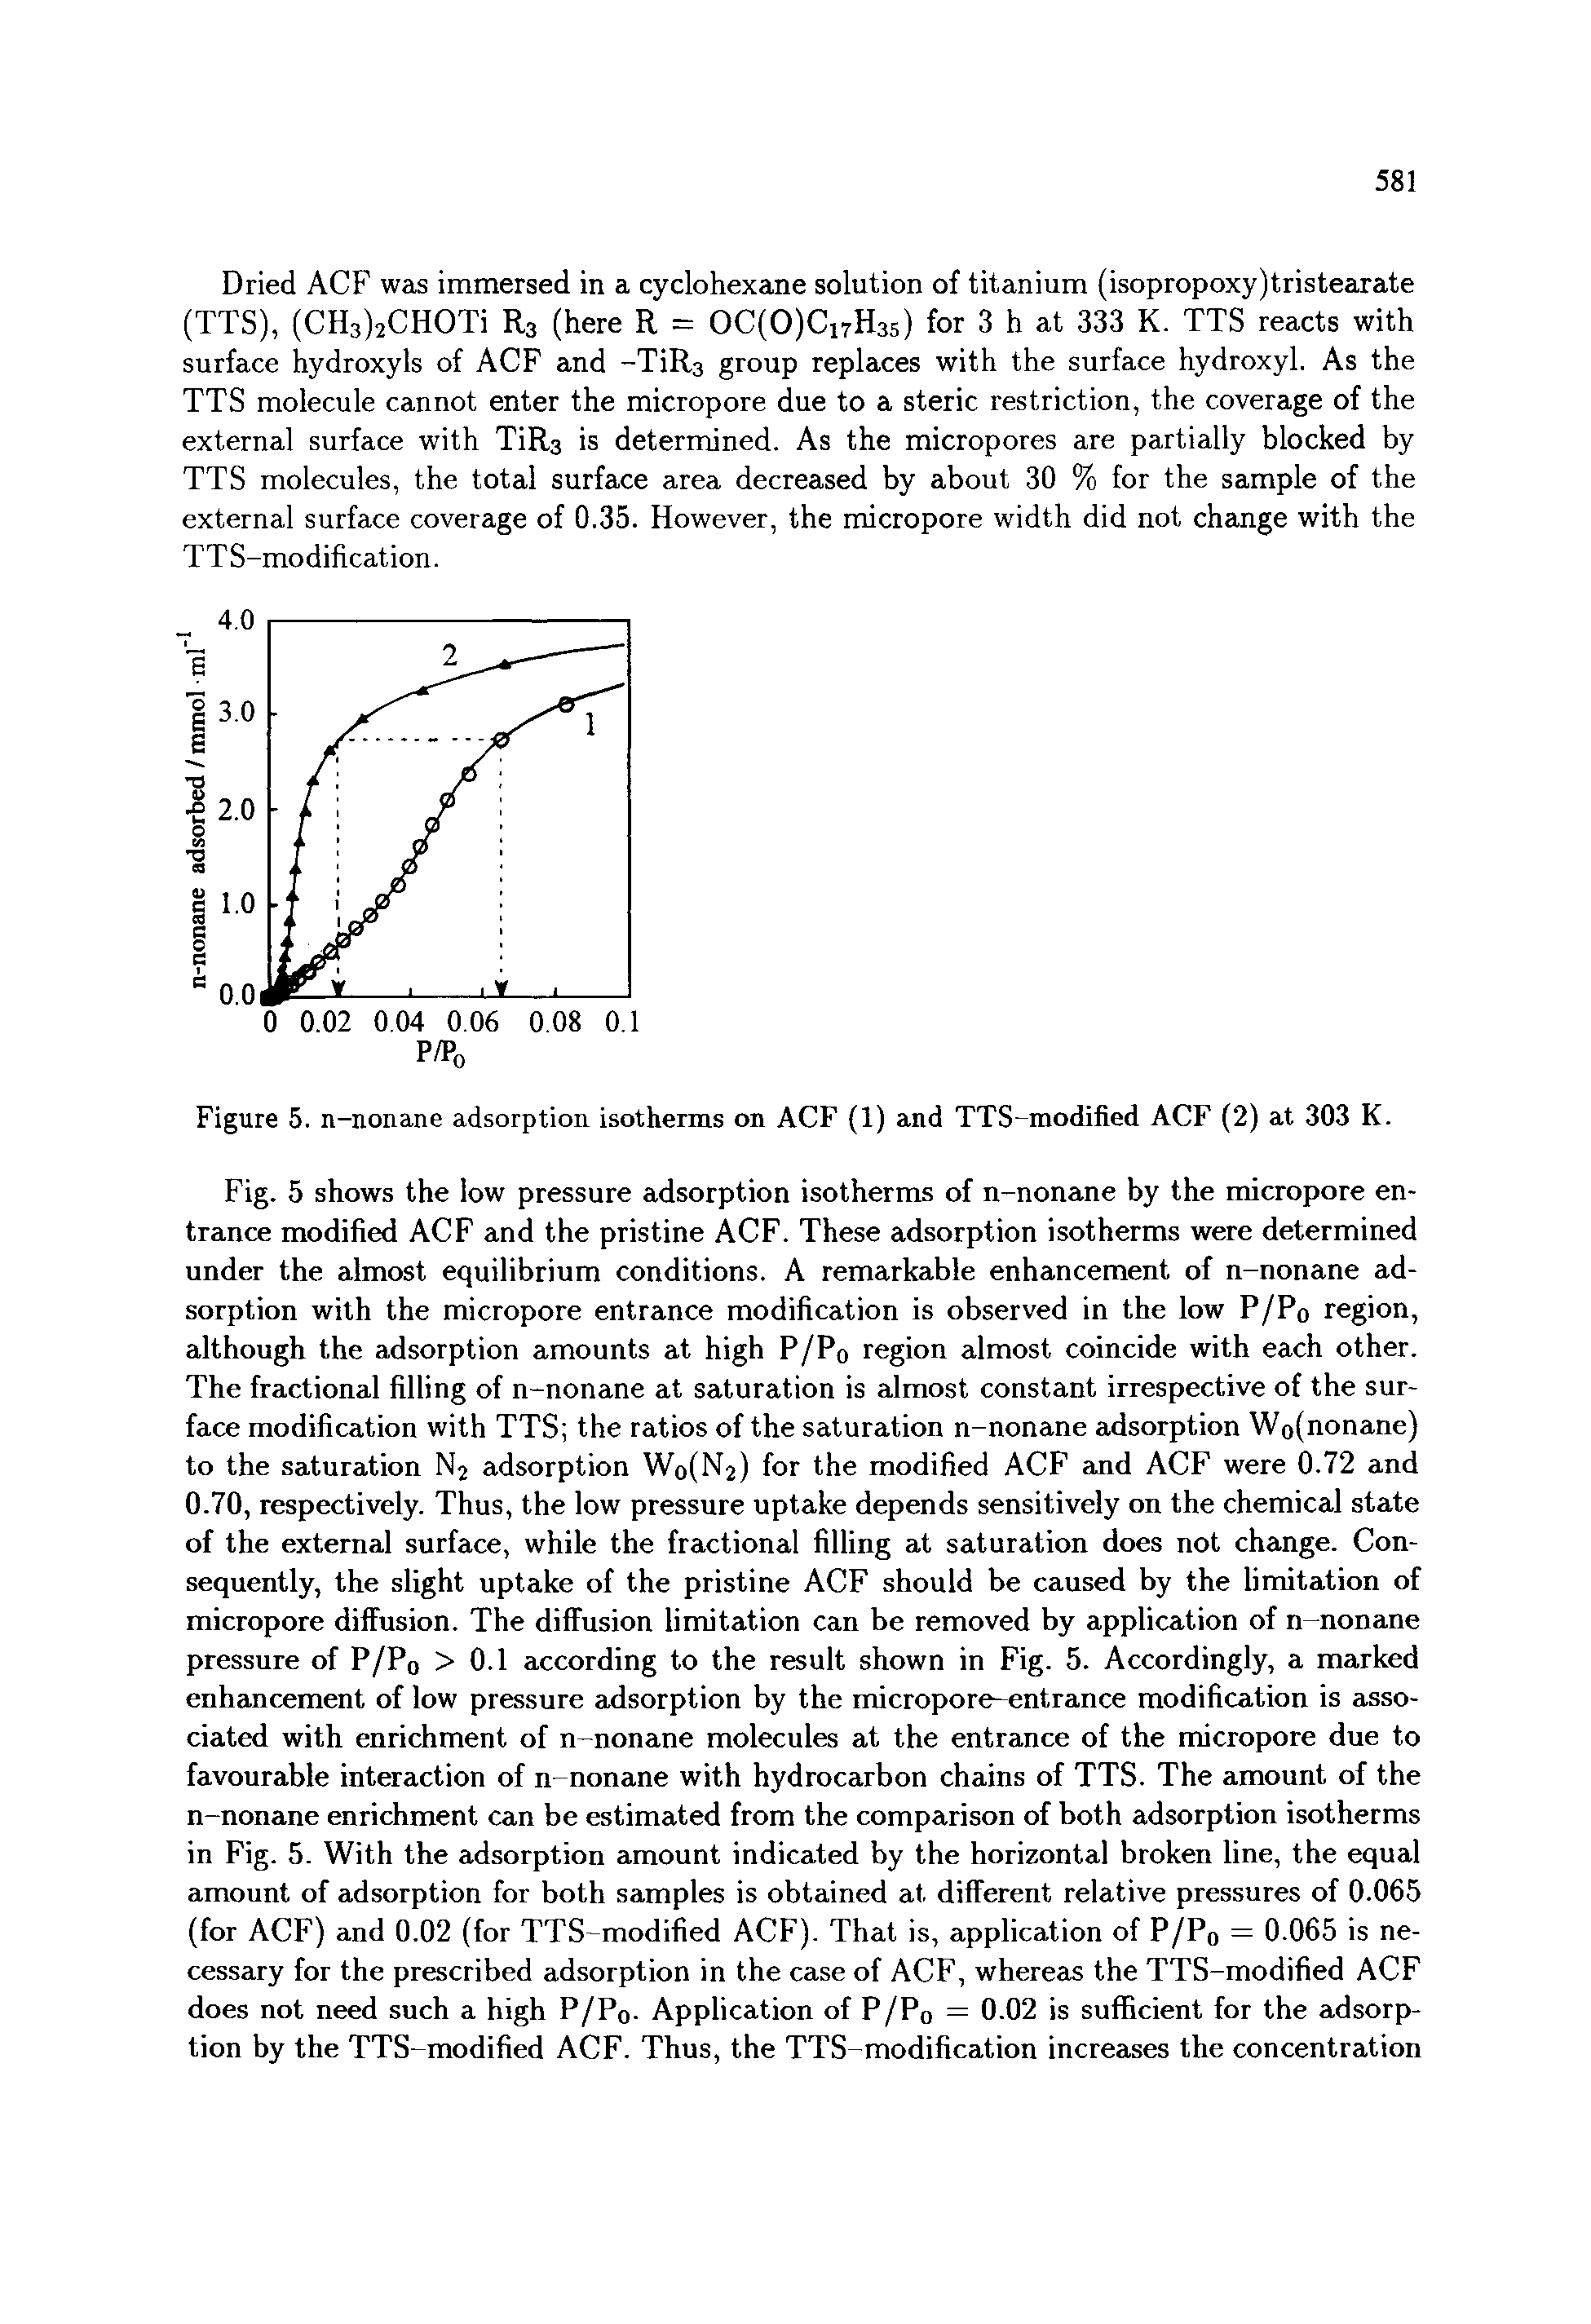 Fig. 5 shows the low pressure adsorption isotherms of n-nonane by the micropore entrance modified ACF and the pristine ACF. These adsorption isotherms were determined under the almost equilibrium conditions. A remarkable enhancement of n-nonane adsorption with the micropore entrance modification is observed in the low P/Po region, although the adsorption amounts at high P/Pq region almost coincide with each other. The fractional filling of n-nonane at saturation is almost constant irrespective of the surface modification with TTS the ratios of the saturation n-nonane adsorption Wo(nonane) to the saturation Nj adsorption Wo(N2) for the modified ACF and ACF were 0.72 and 0.70, respectively. Thus, the low pressure uptake depends sensitively on the chemical state of the external surface, while the fractional filling at saturation does not change. Consequently, the slight uptake of the pristine ACF should be caused by the limitation of micropore diffusion. The diffusion limitation can be removed by application of n-nonane pressure of P/Pq >0.1 according to the result shown in Fig. 5. Accordingly, a marked enhancement of low pressure adsorption by the micropore-entrance modification is associated with enrichment of n-nonane molecules at the entrance of the micropore due to favourable interaction of n-nonane with hydrocarbon chains of TTS. The amount of the n-nonane enrichment can be estimated from the comparison of both adsorption isotherms in Fig. 5. With the adsorption amount indicated by the horizontal broken line, the equal amount of adsorption for both samples is obtained at different relative pressures of 0.065 (for ACF) and 0.02 (for TTS-modified ACF). That is, application of P/Pq = 0.065 is necessary for the prescribed adsorption in the case of ACF, whereas the TTS-modified ACF does not need such a high P/Pq. Application of P/Po = 0.02 is sufficient for the adsorption by the TTS-modified ACF. Thus, the TTS-modification increases the concentration...